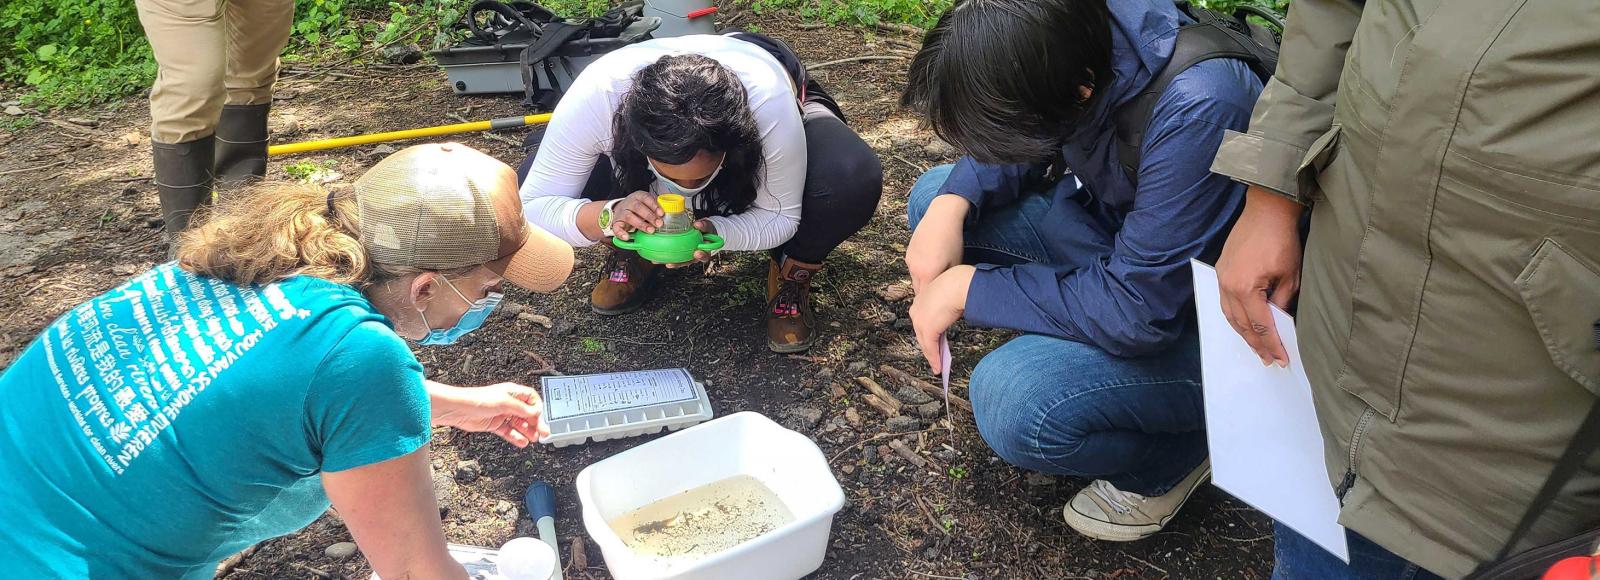 2021 participants examine macroinvertebrates during a field training with City of Portland Bureau of Environmental Services.